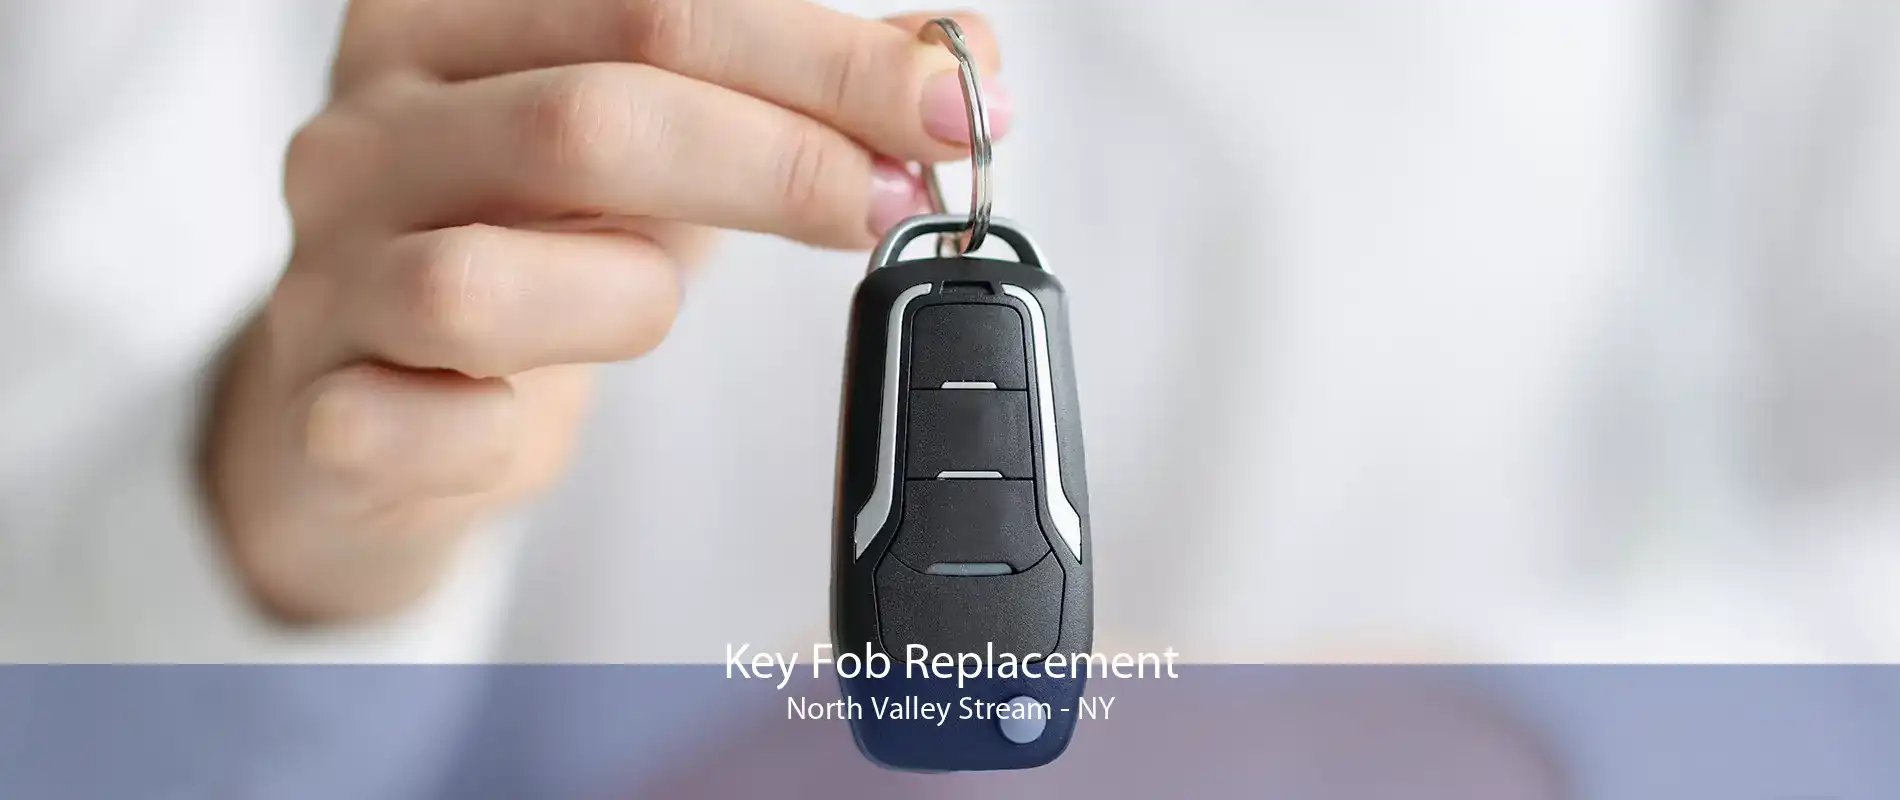 Key Fob Replacement North Valley Stream - NY